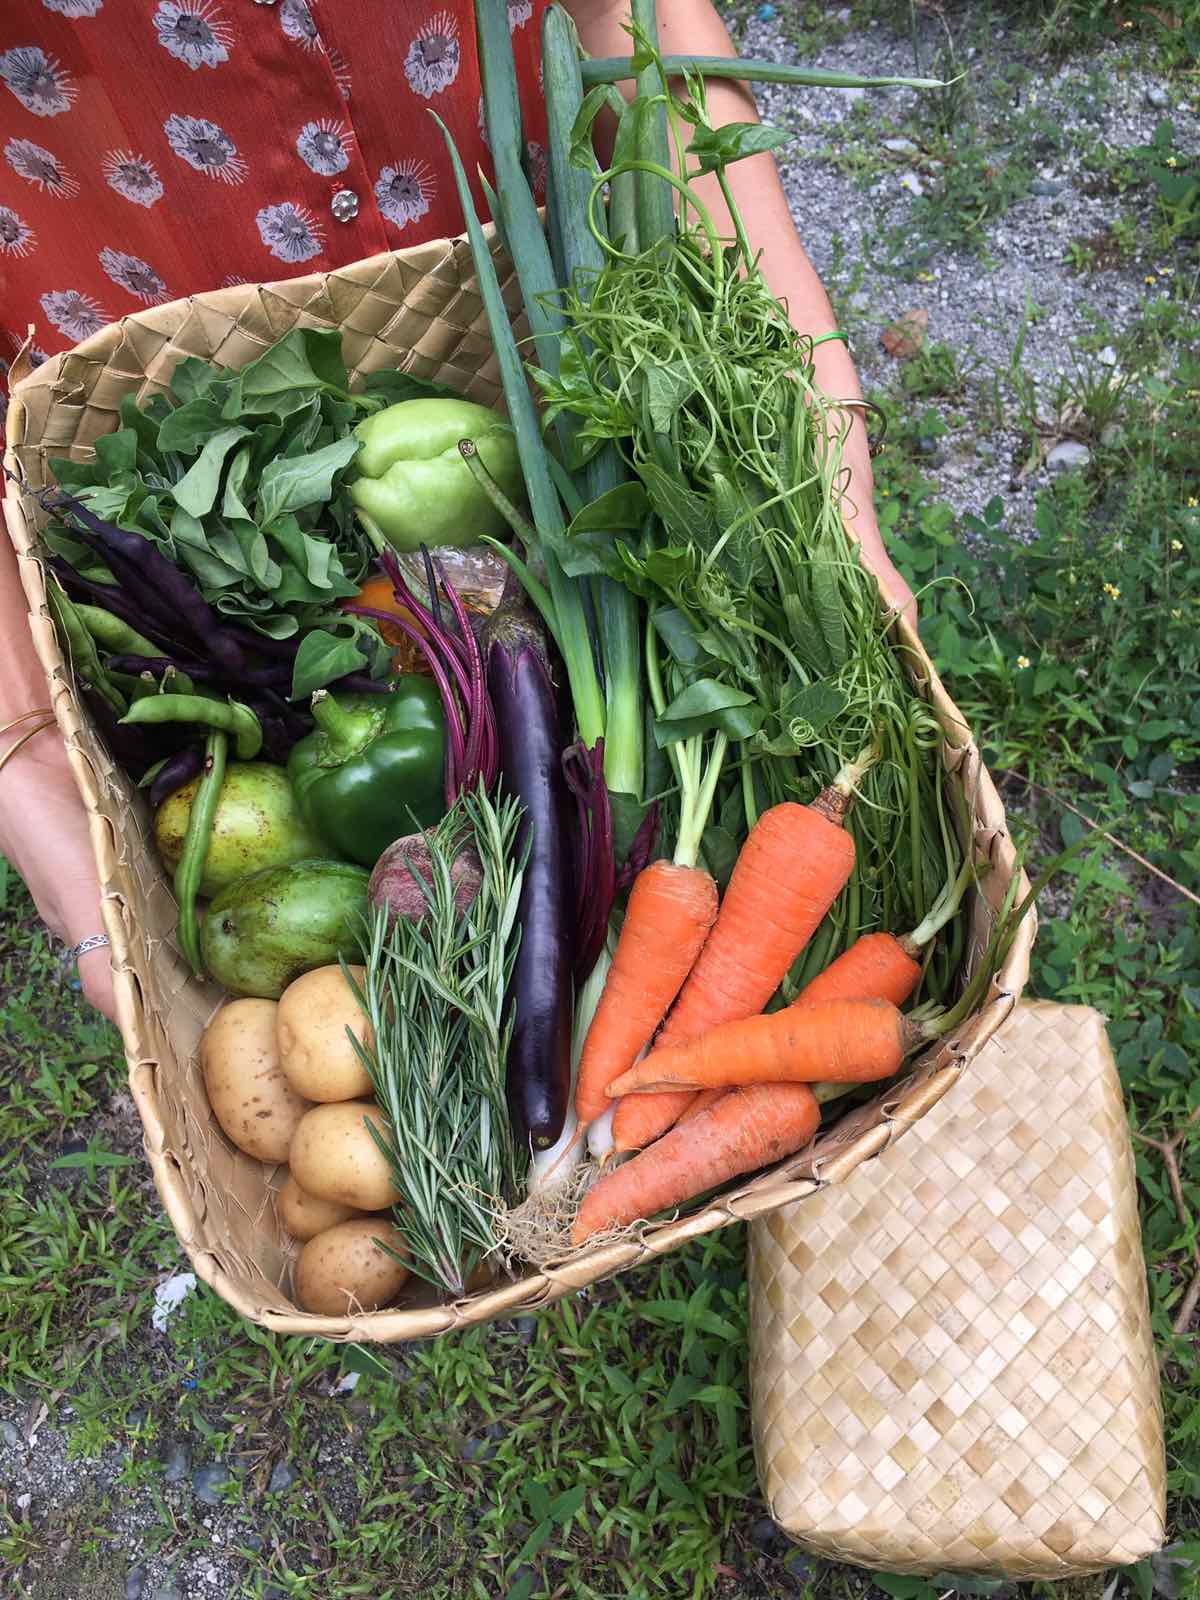 A colorful vegetable farm share package in a woven bamboo box. Image credit: Courtesy of Good Food Community